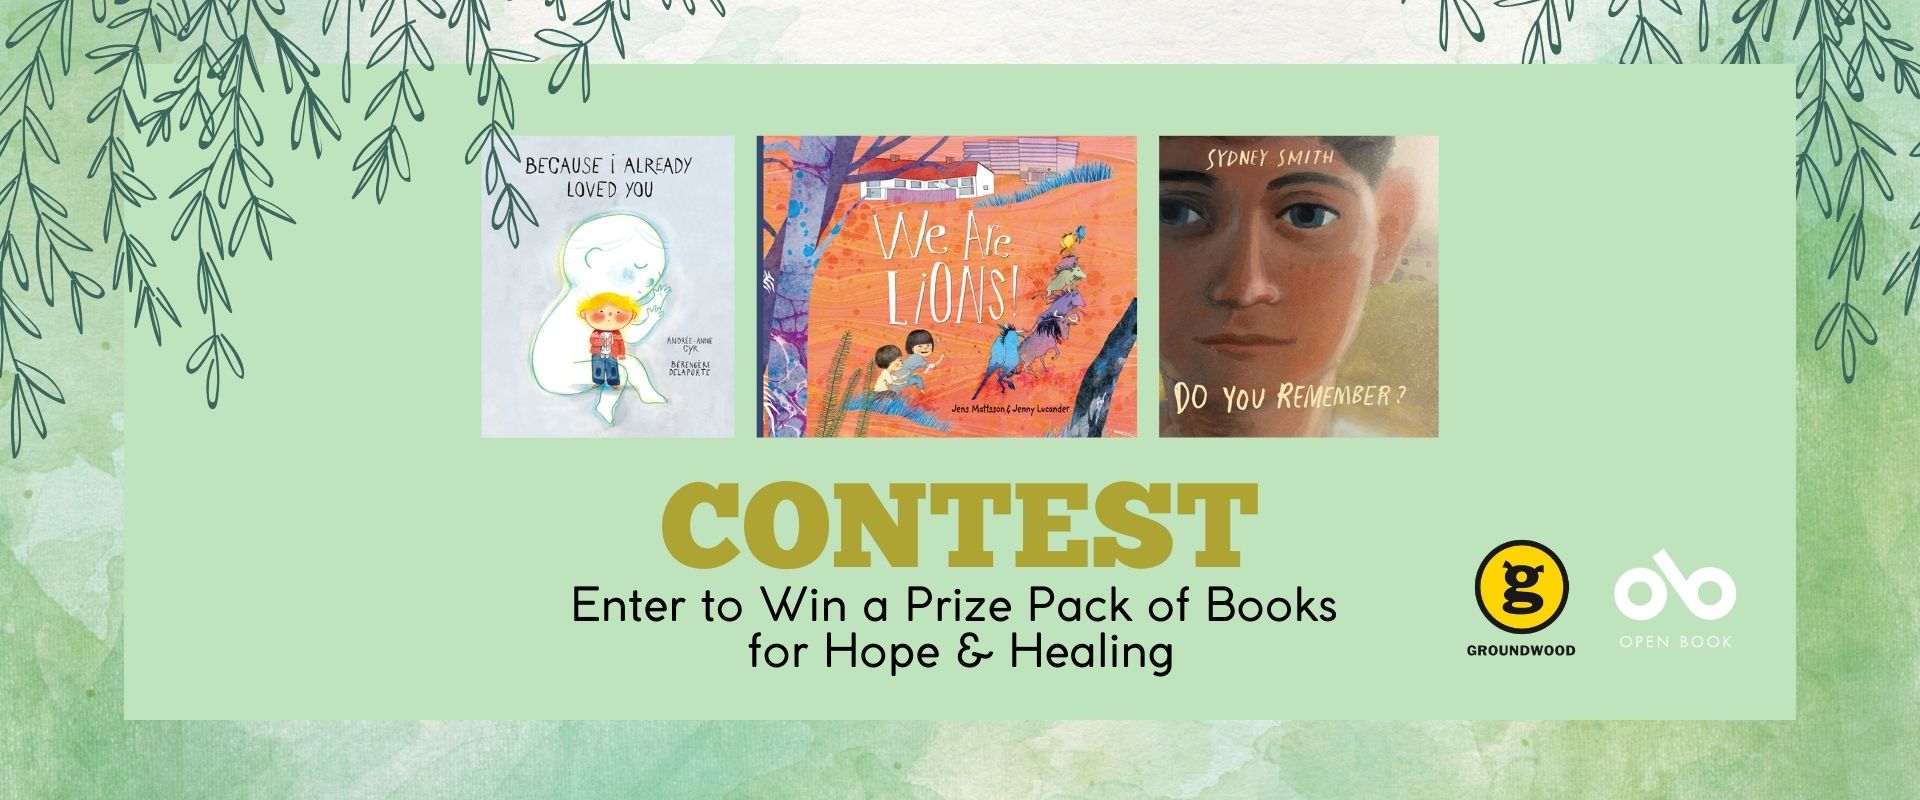 Green banner image with text reading Contest Win a Prize Pack of books for hope and healing. Open Book and Groundwood Books logos bottom right